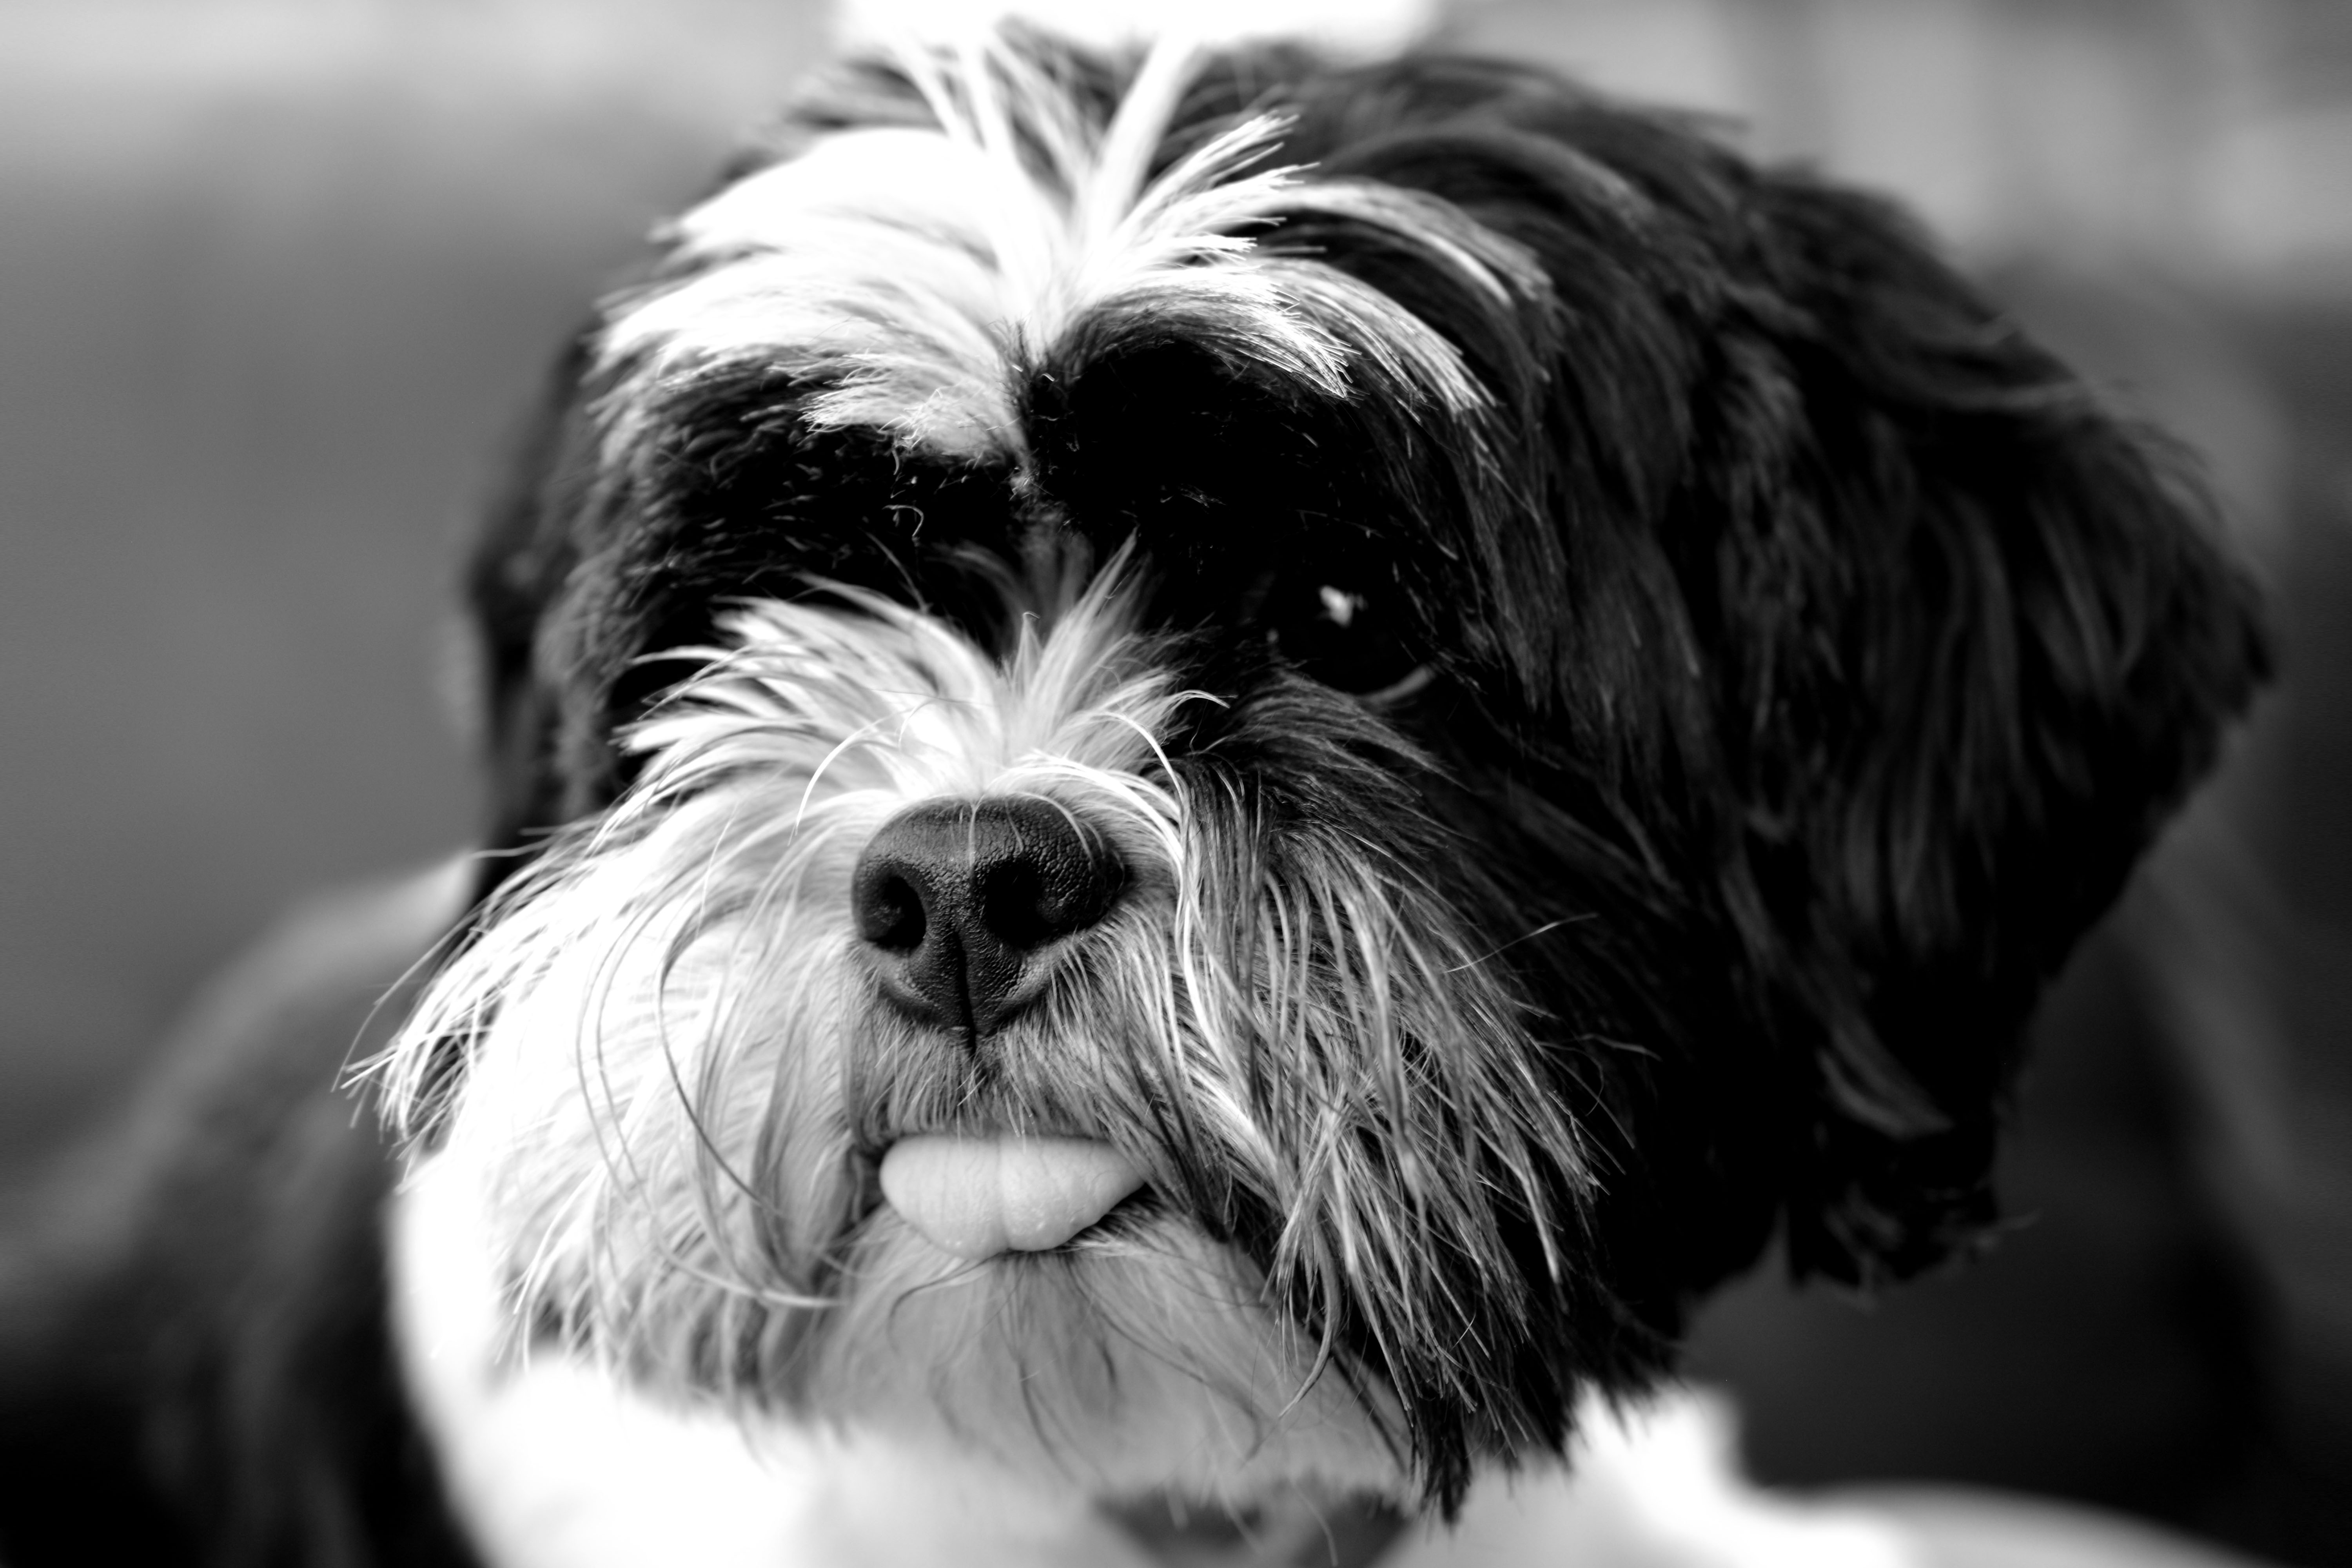 Wallpapers monochrome dogs protruding tongue on the desktop